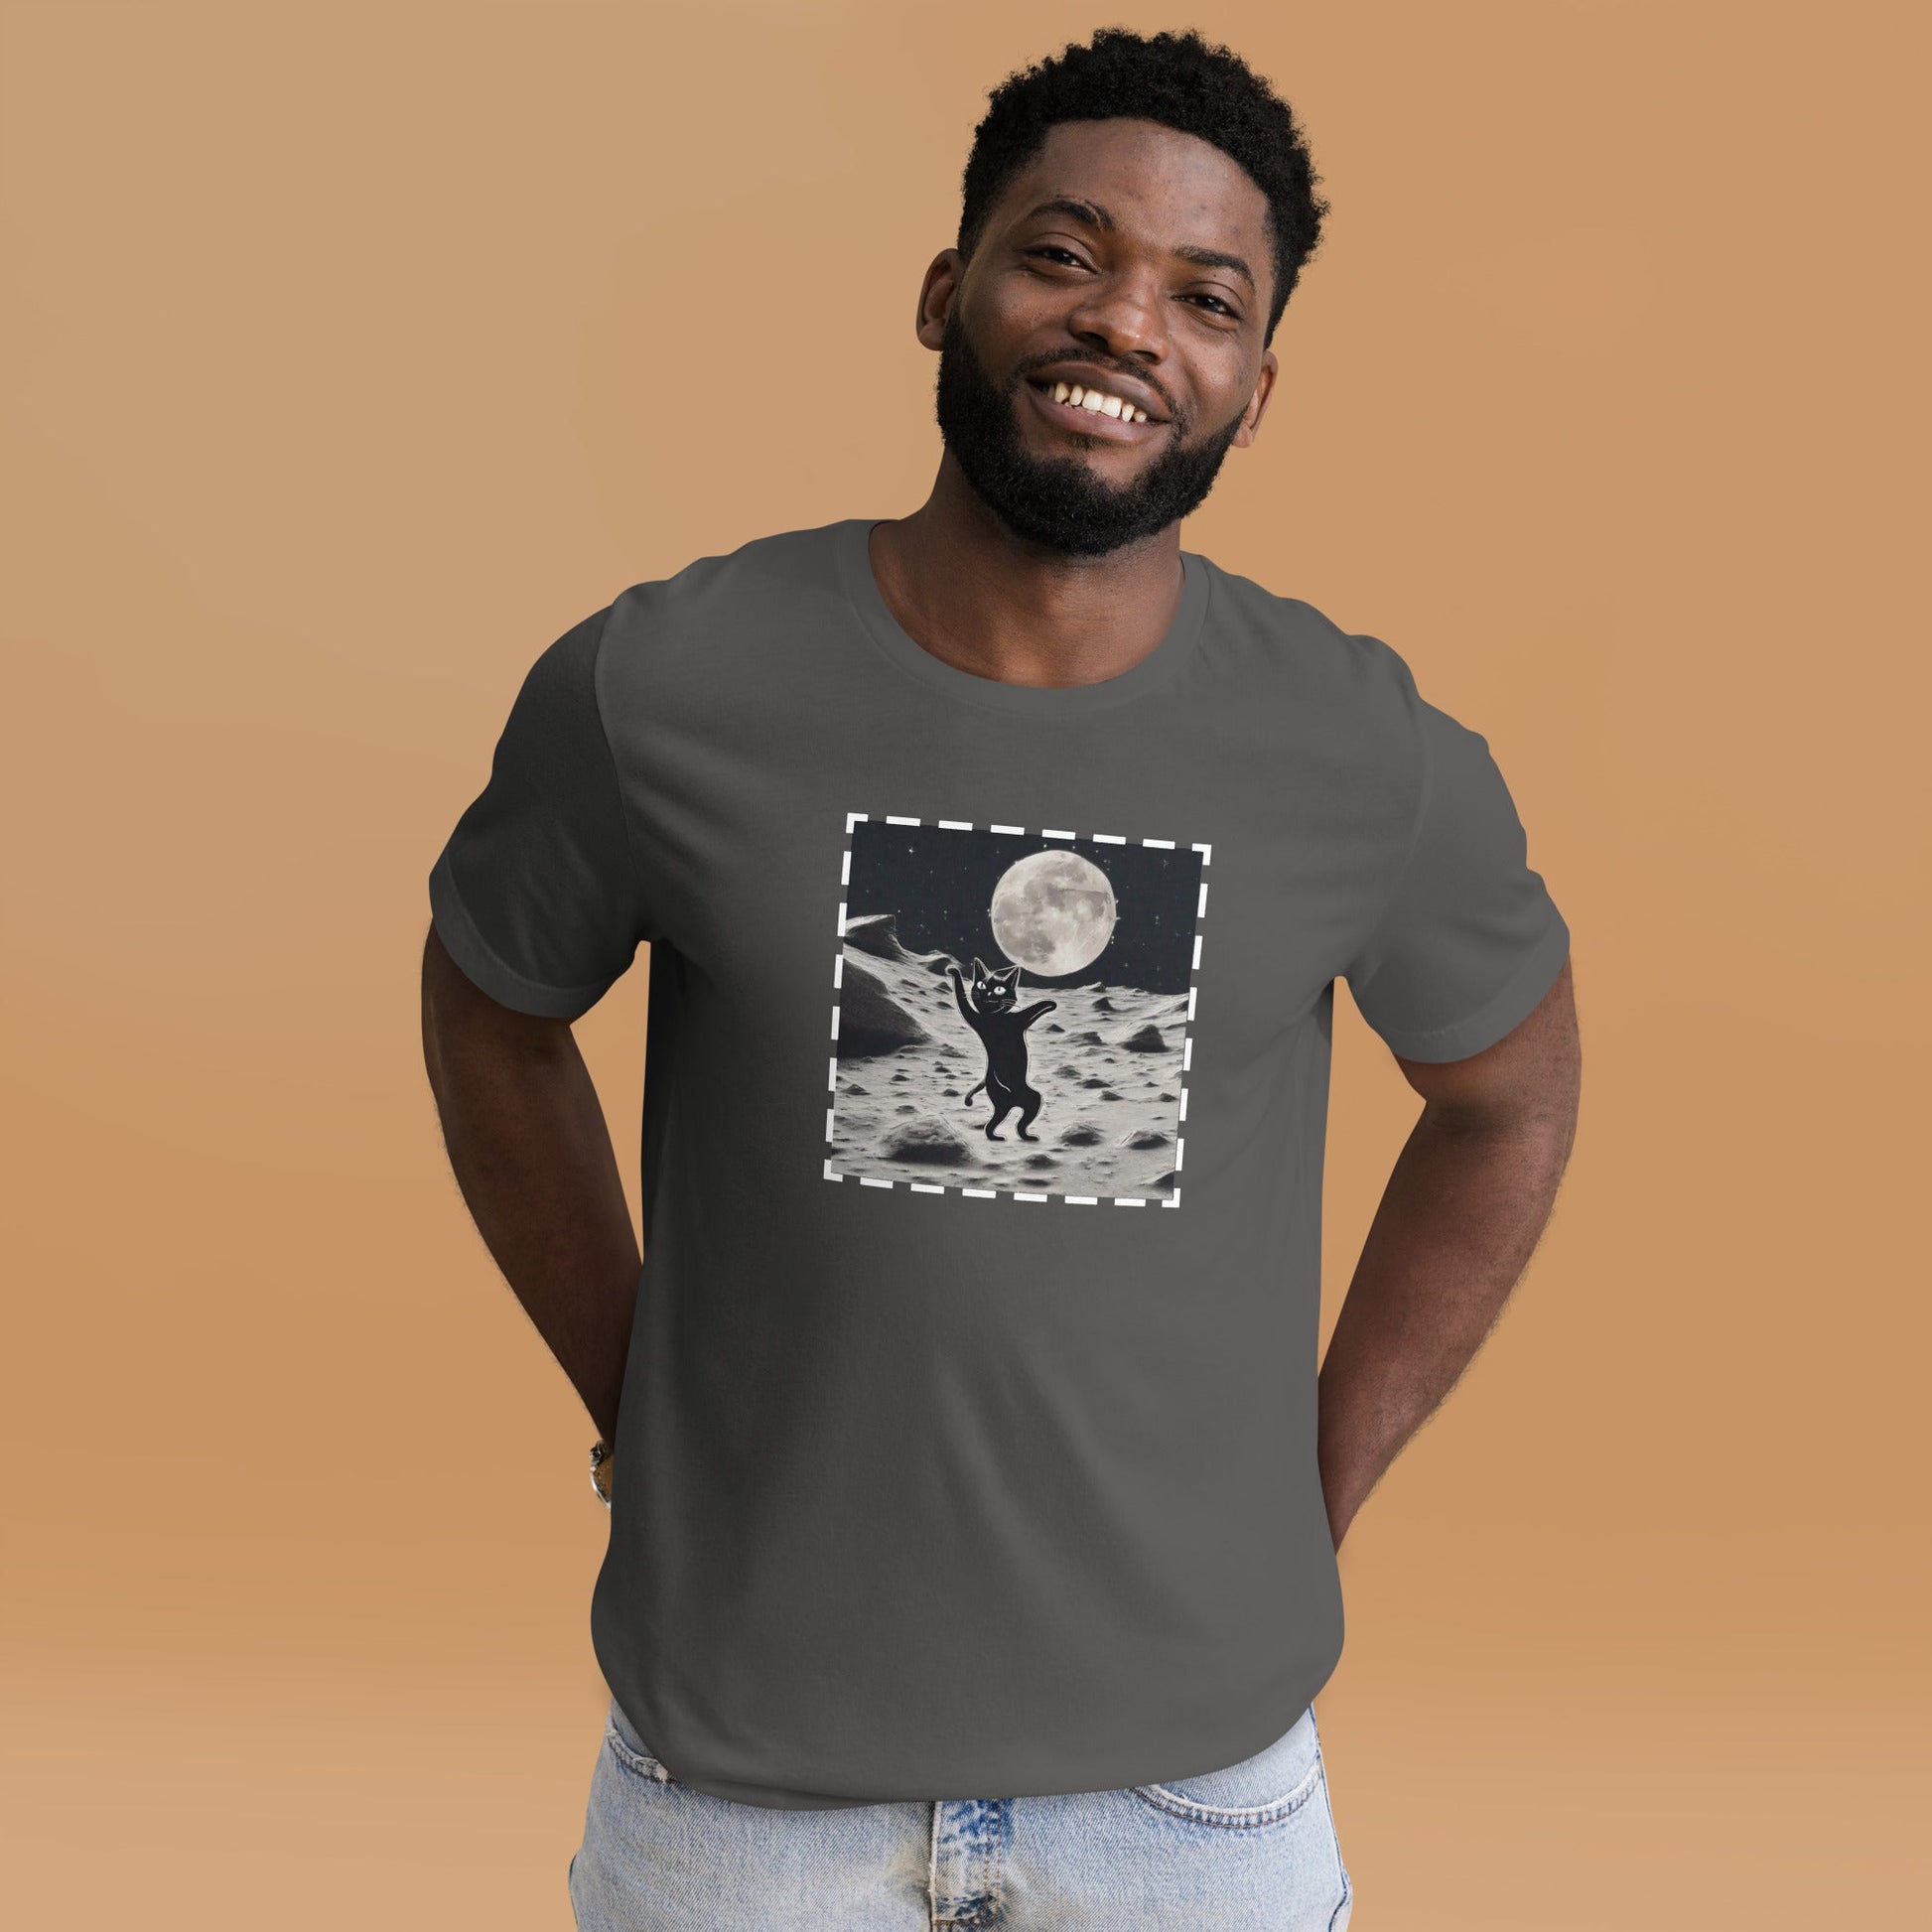 Be Extra! Dancing on a Moon Unisex T-shirt - BeExtra! Apparel & More